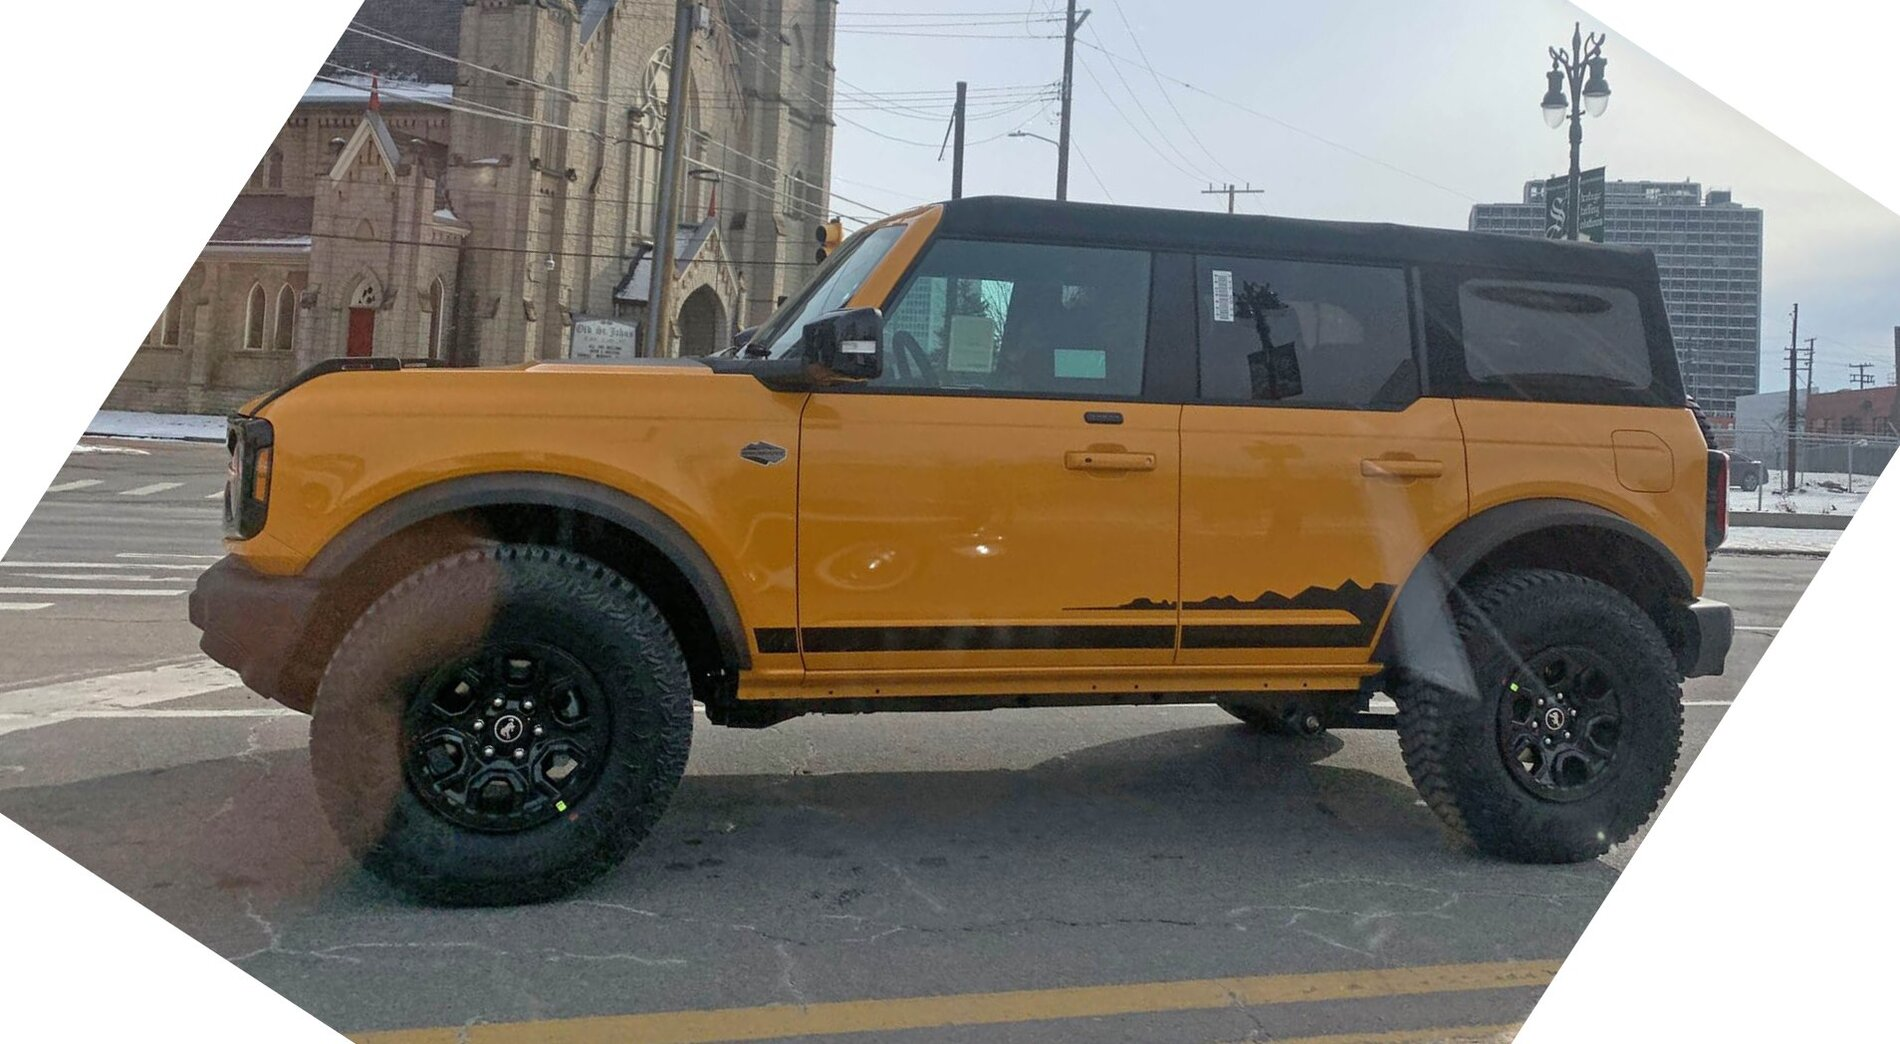 Ford Bronco WILDTRAK (Cyber Orange 4-Door) out and about in Detroit 1612109810395